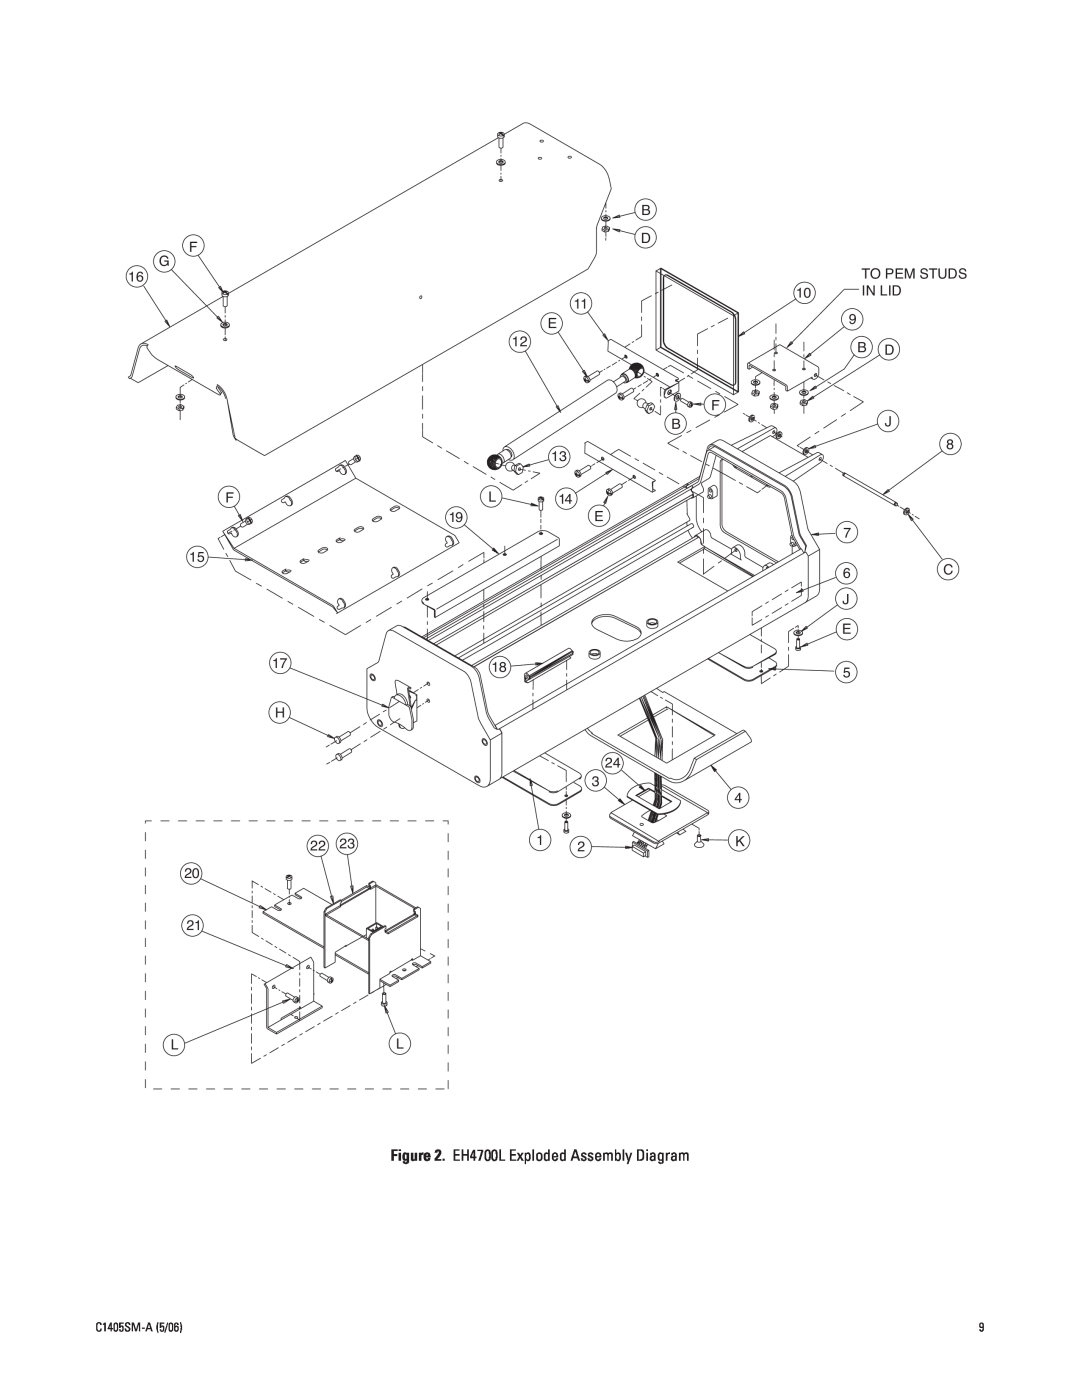 Pelco EH4700 Series manual EH4700L Exploded Assembly Diagram 